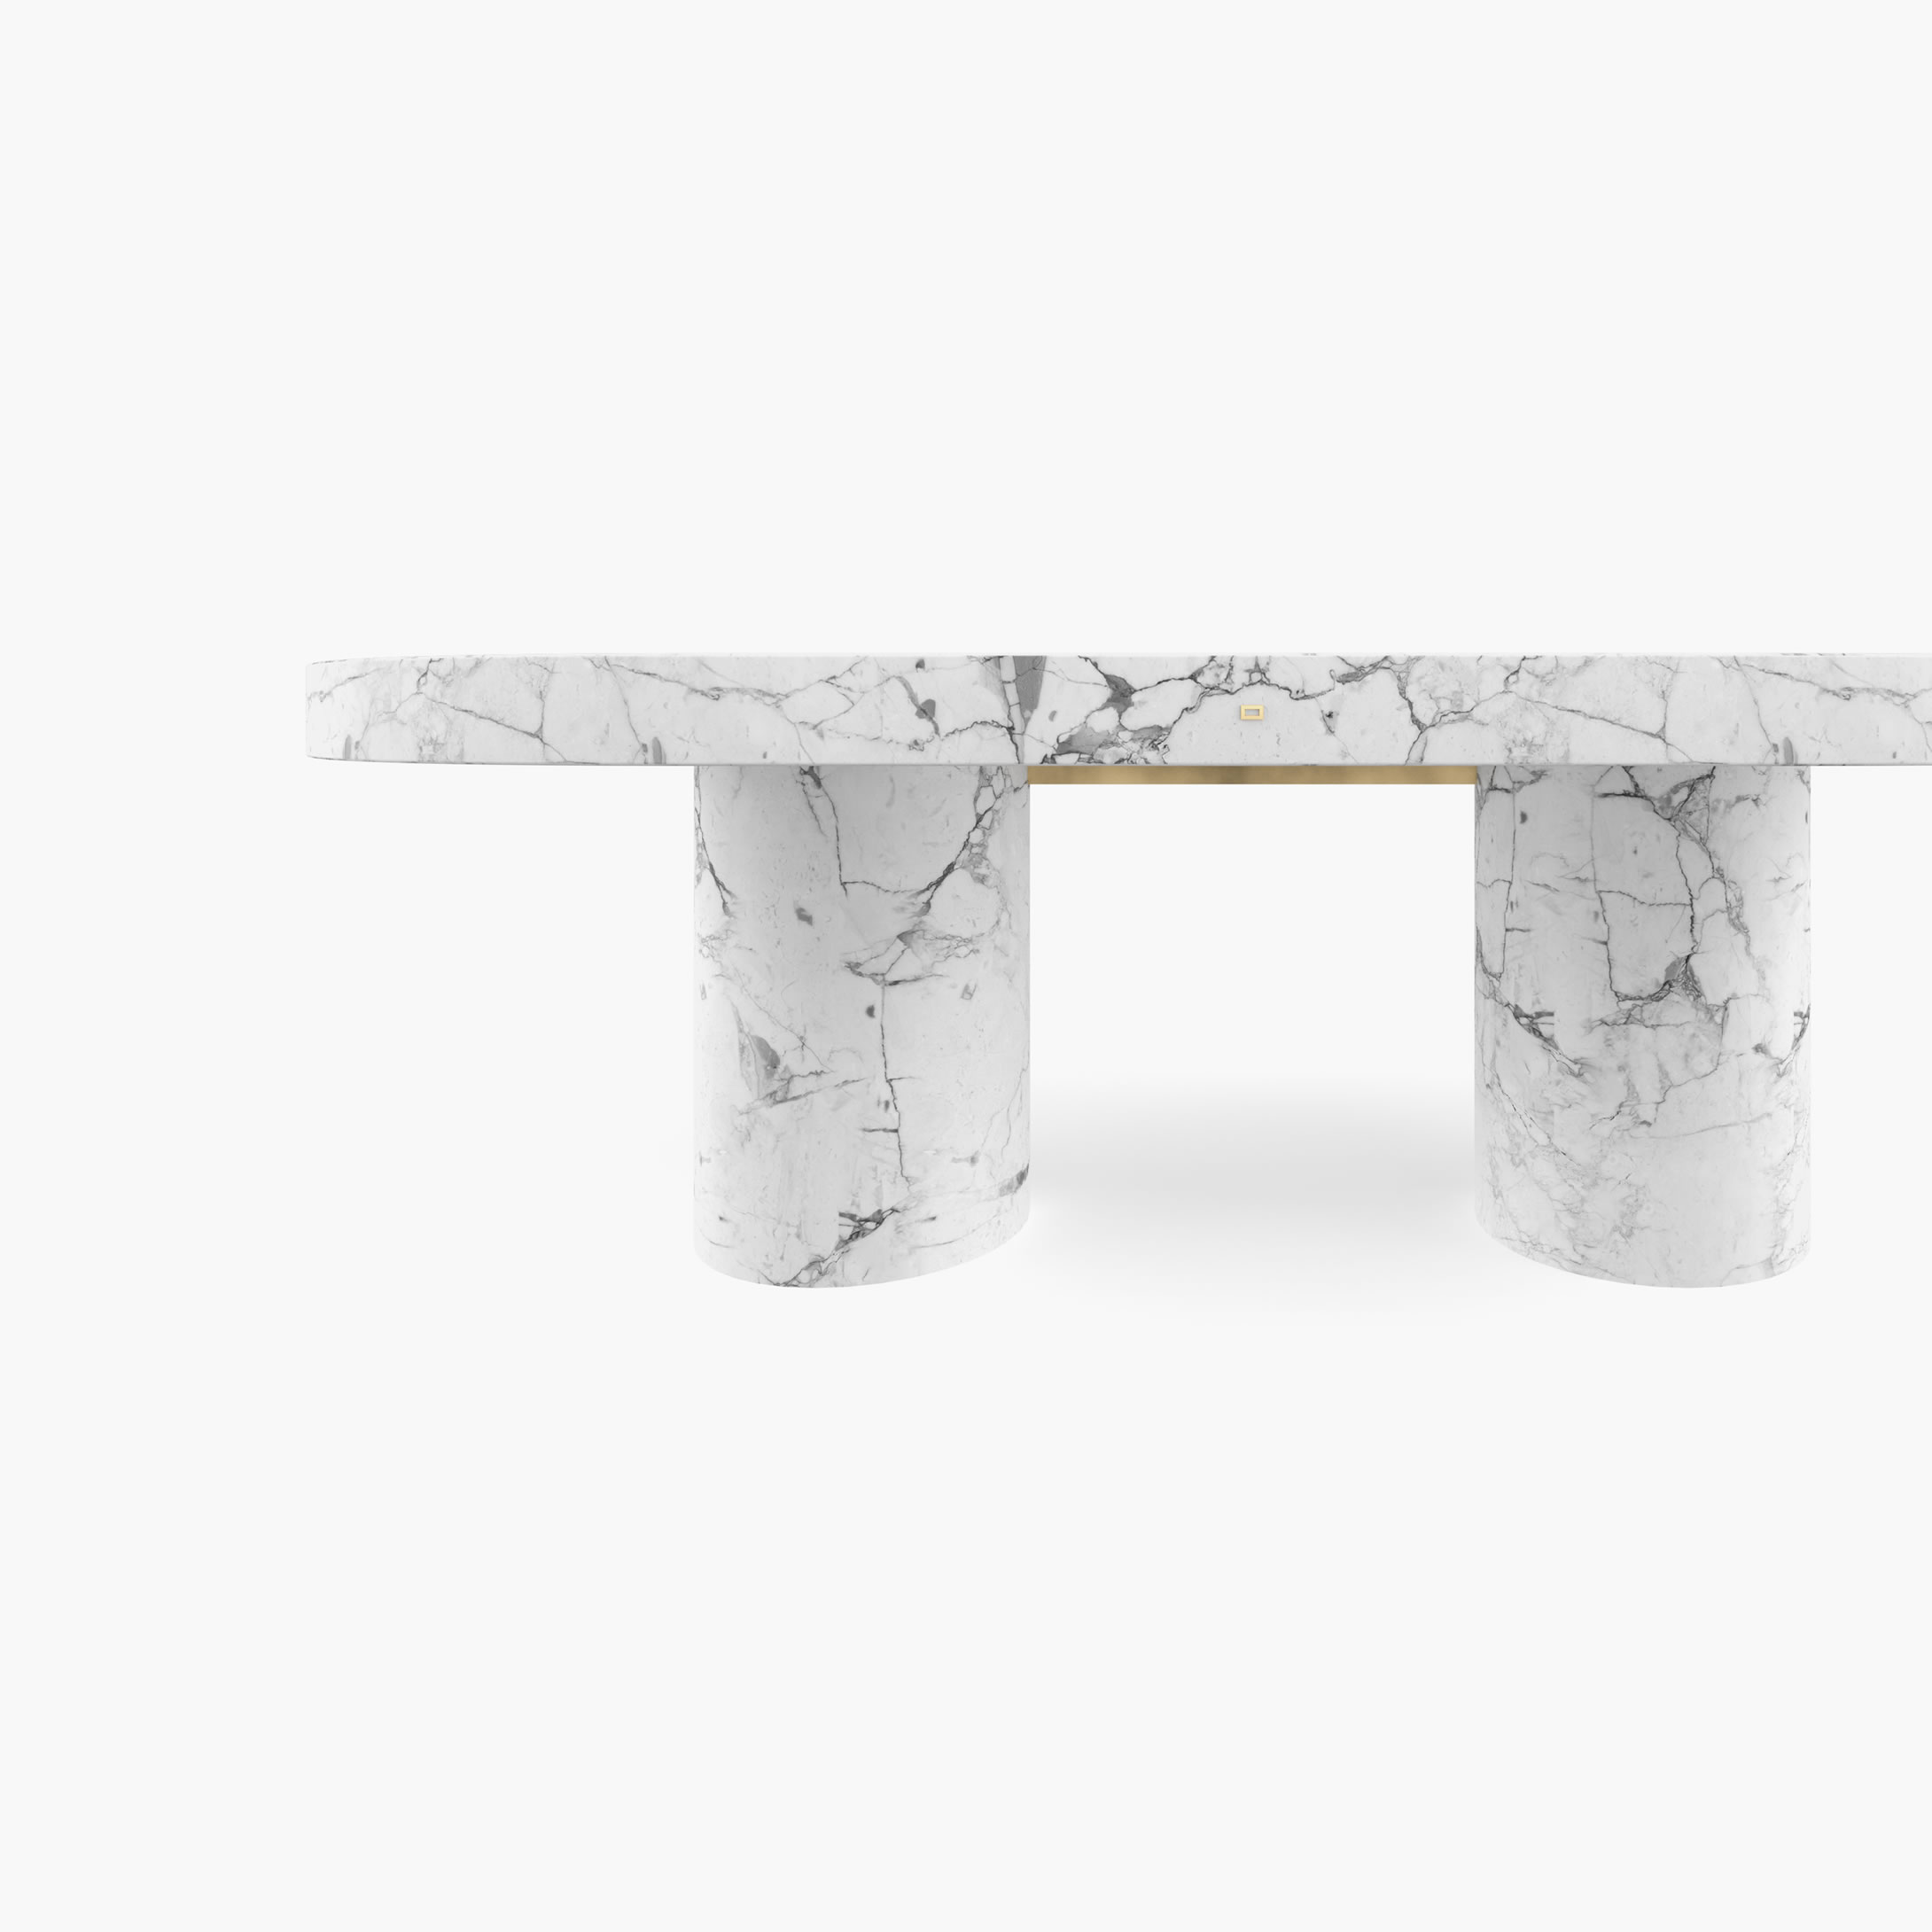 Dining Table Cylinder legs White Arabescato Marble timeless Dining Room art work Dining Tables FS 177 FELIX SCHWAKE